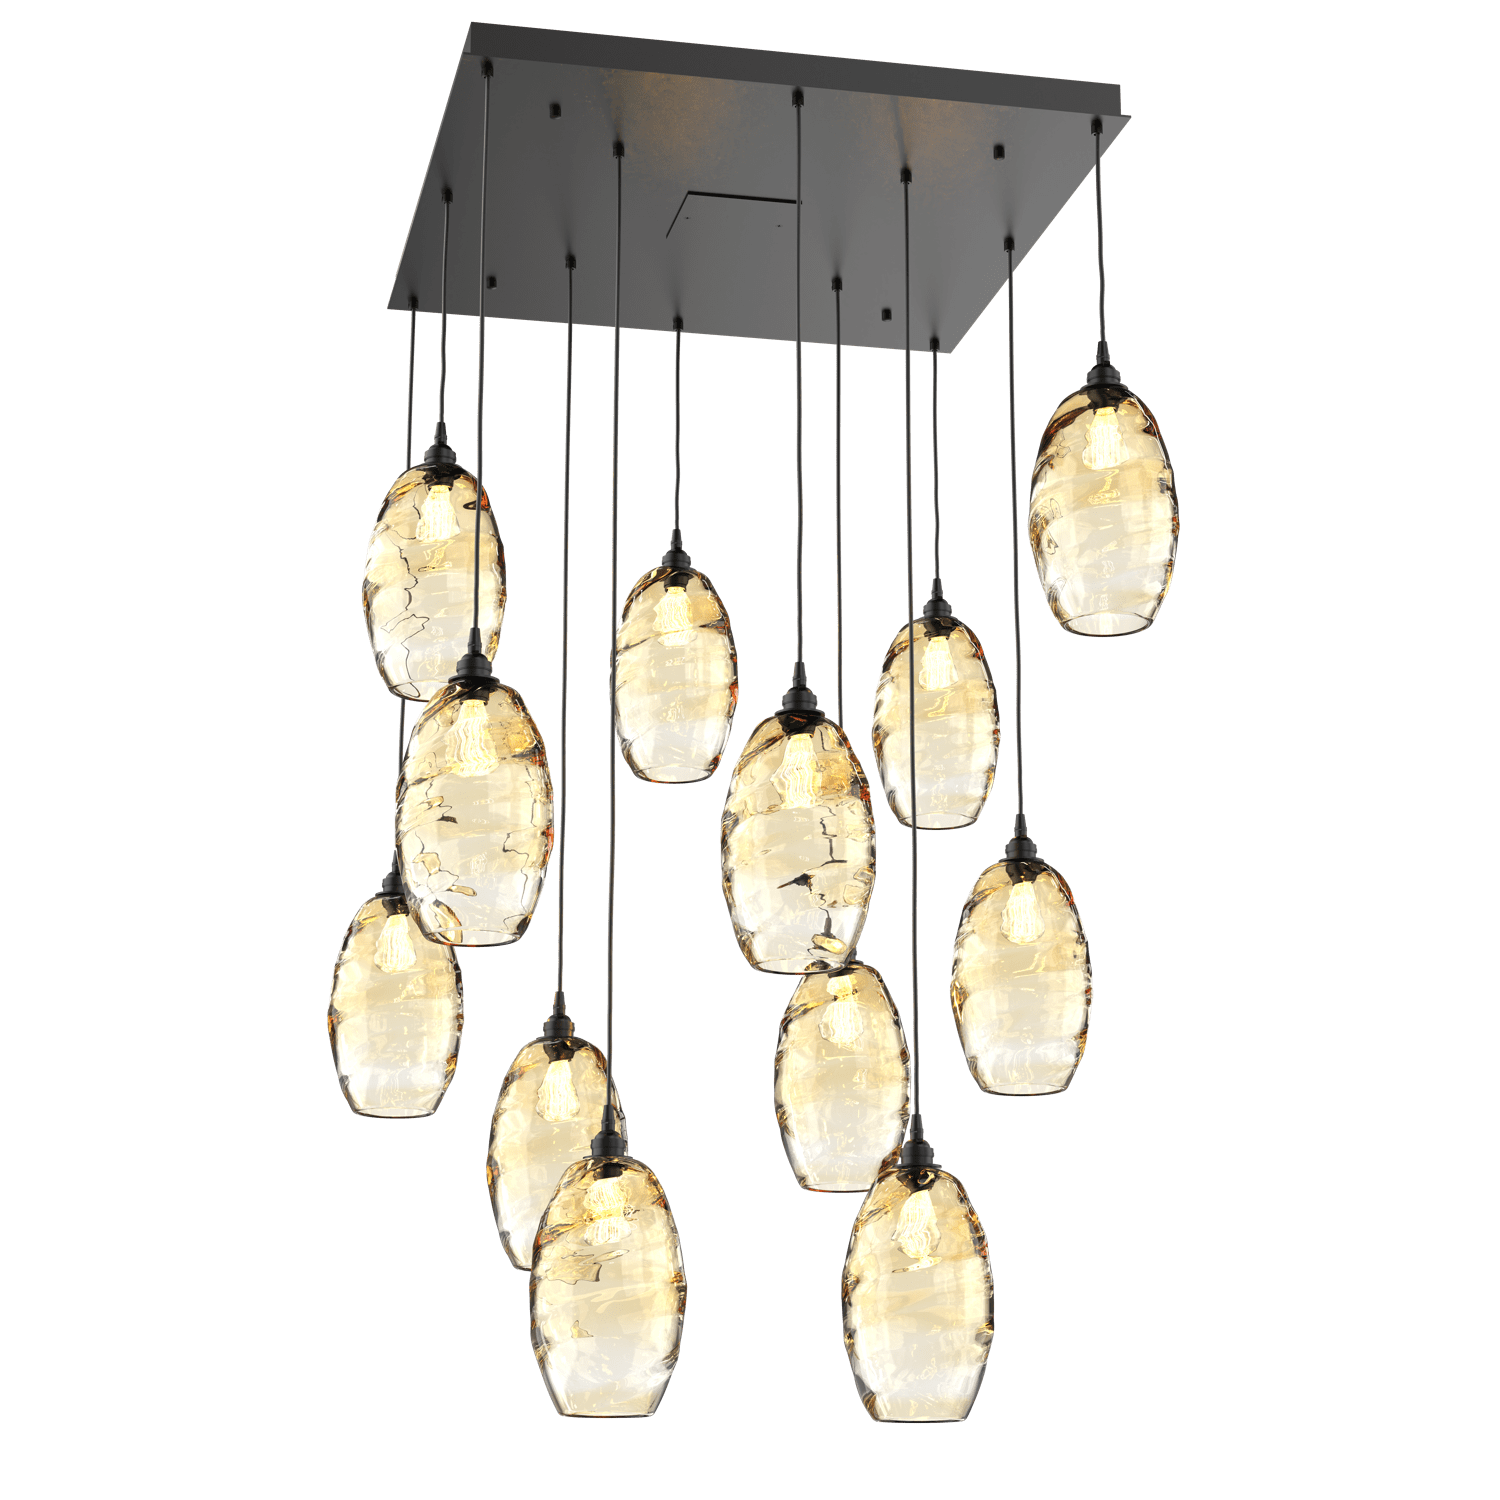 CHB0035-12-MB-OA-Hammerton-Studio-Optic-Blown-Glass-Elisse-12-light-square-pendant-chandelier-with-matte-black-finish-and-optic-amber-blown-glass-shades-and-incandescent-lamping